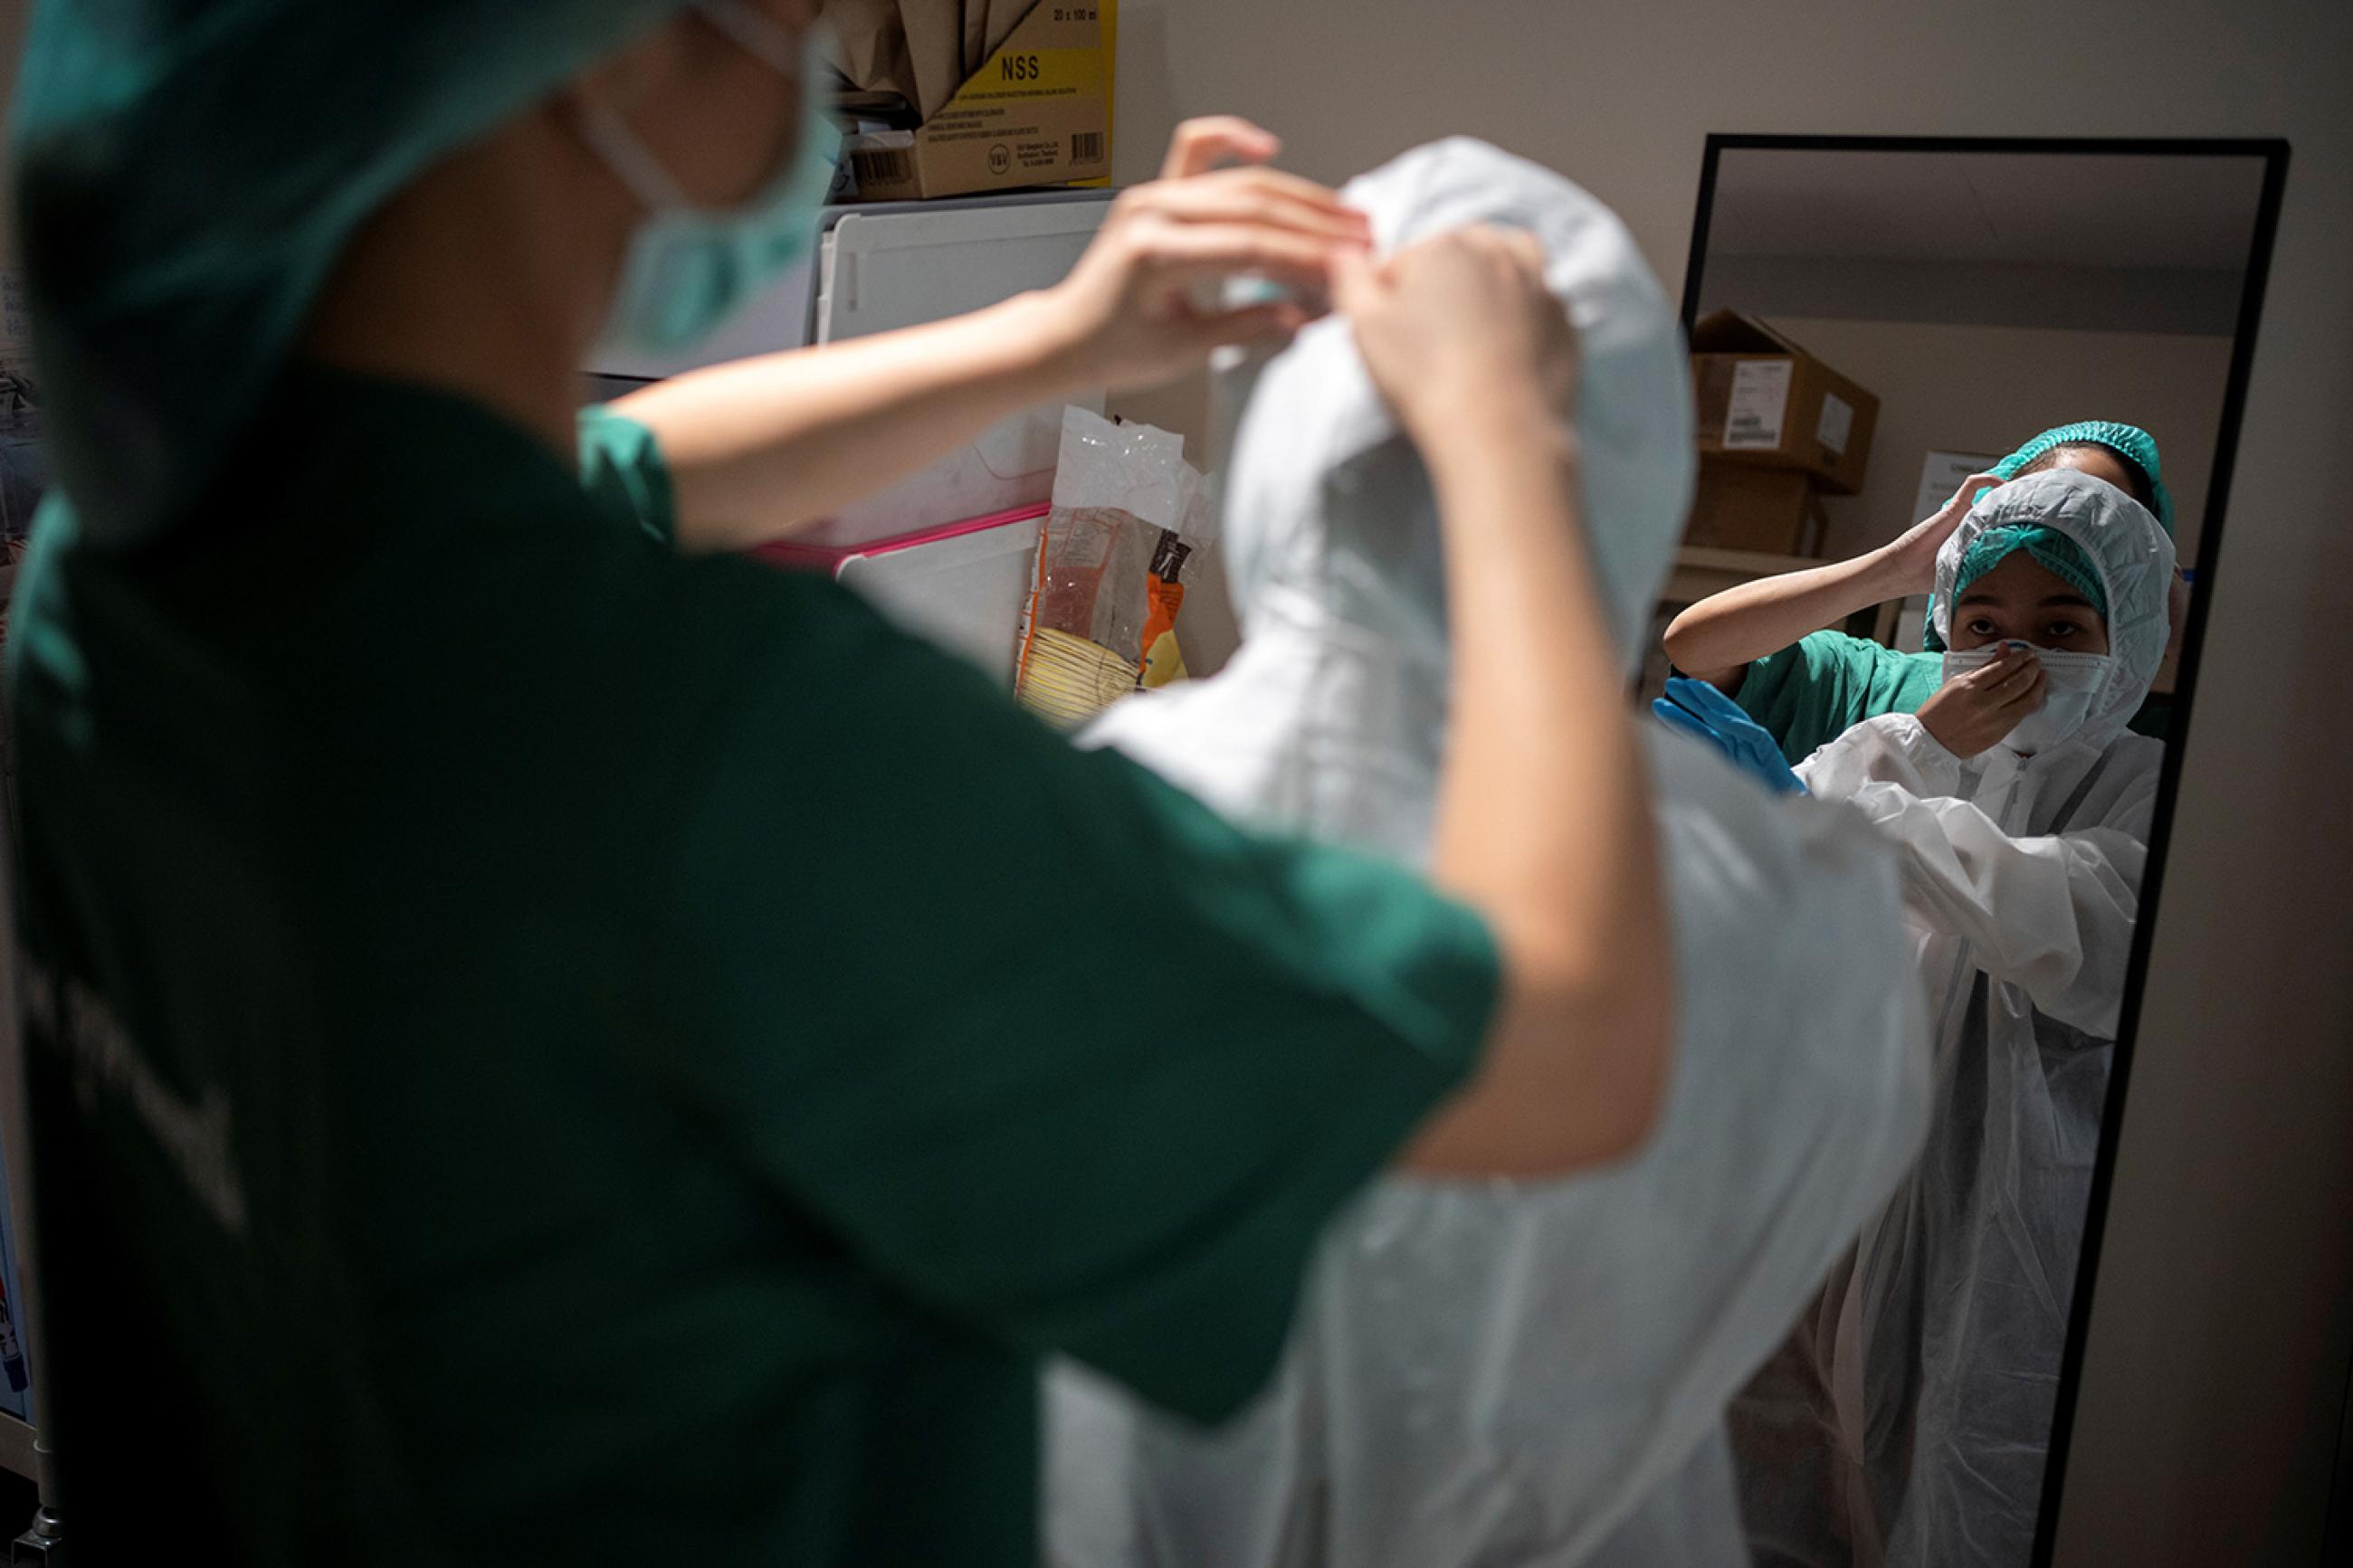 Nurse Tatsanee Onthong, 26, receives help putting on PPE before attending to a COVID-19 patient in the ICU at King Chulalongkorn Memorial Hospital in Bangkok, Thailand, on April 22, 2020. Picture shows a nurse being helped into her PPE. REUTERS/Athit Perawongmetha